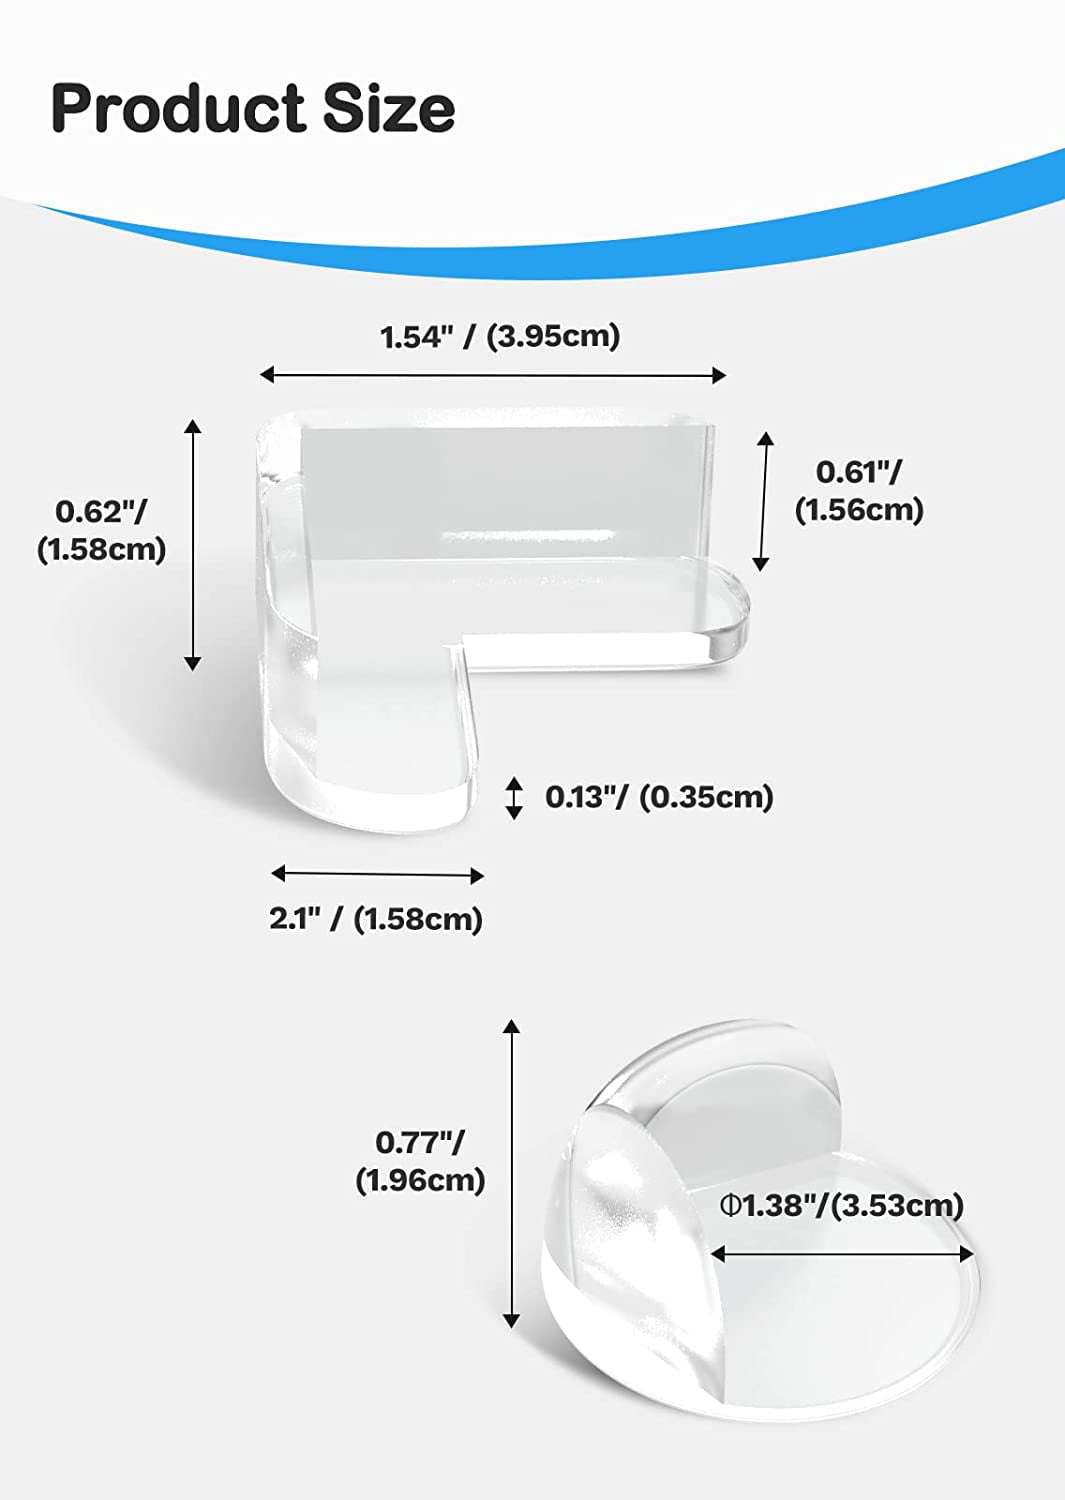 Table Corner Protectors Baby Proof,(8 Pack) L Shaped Clear Corner  Protectors for Furniture, xuenair Rubber Baby Proofing Glass Table Corner  Guards